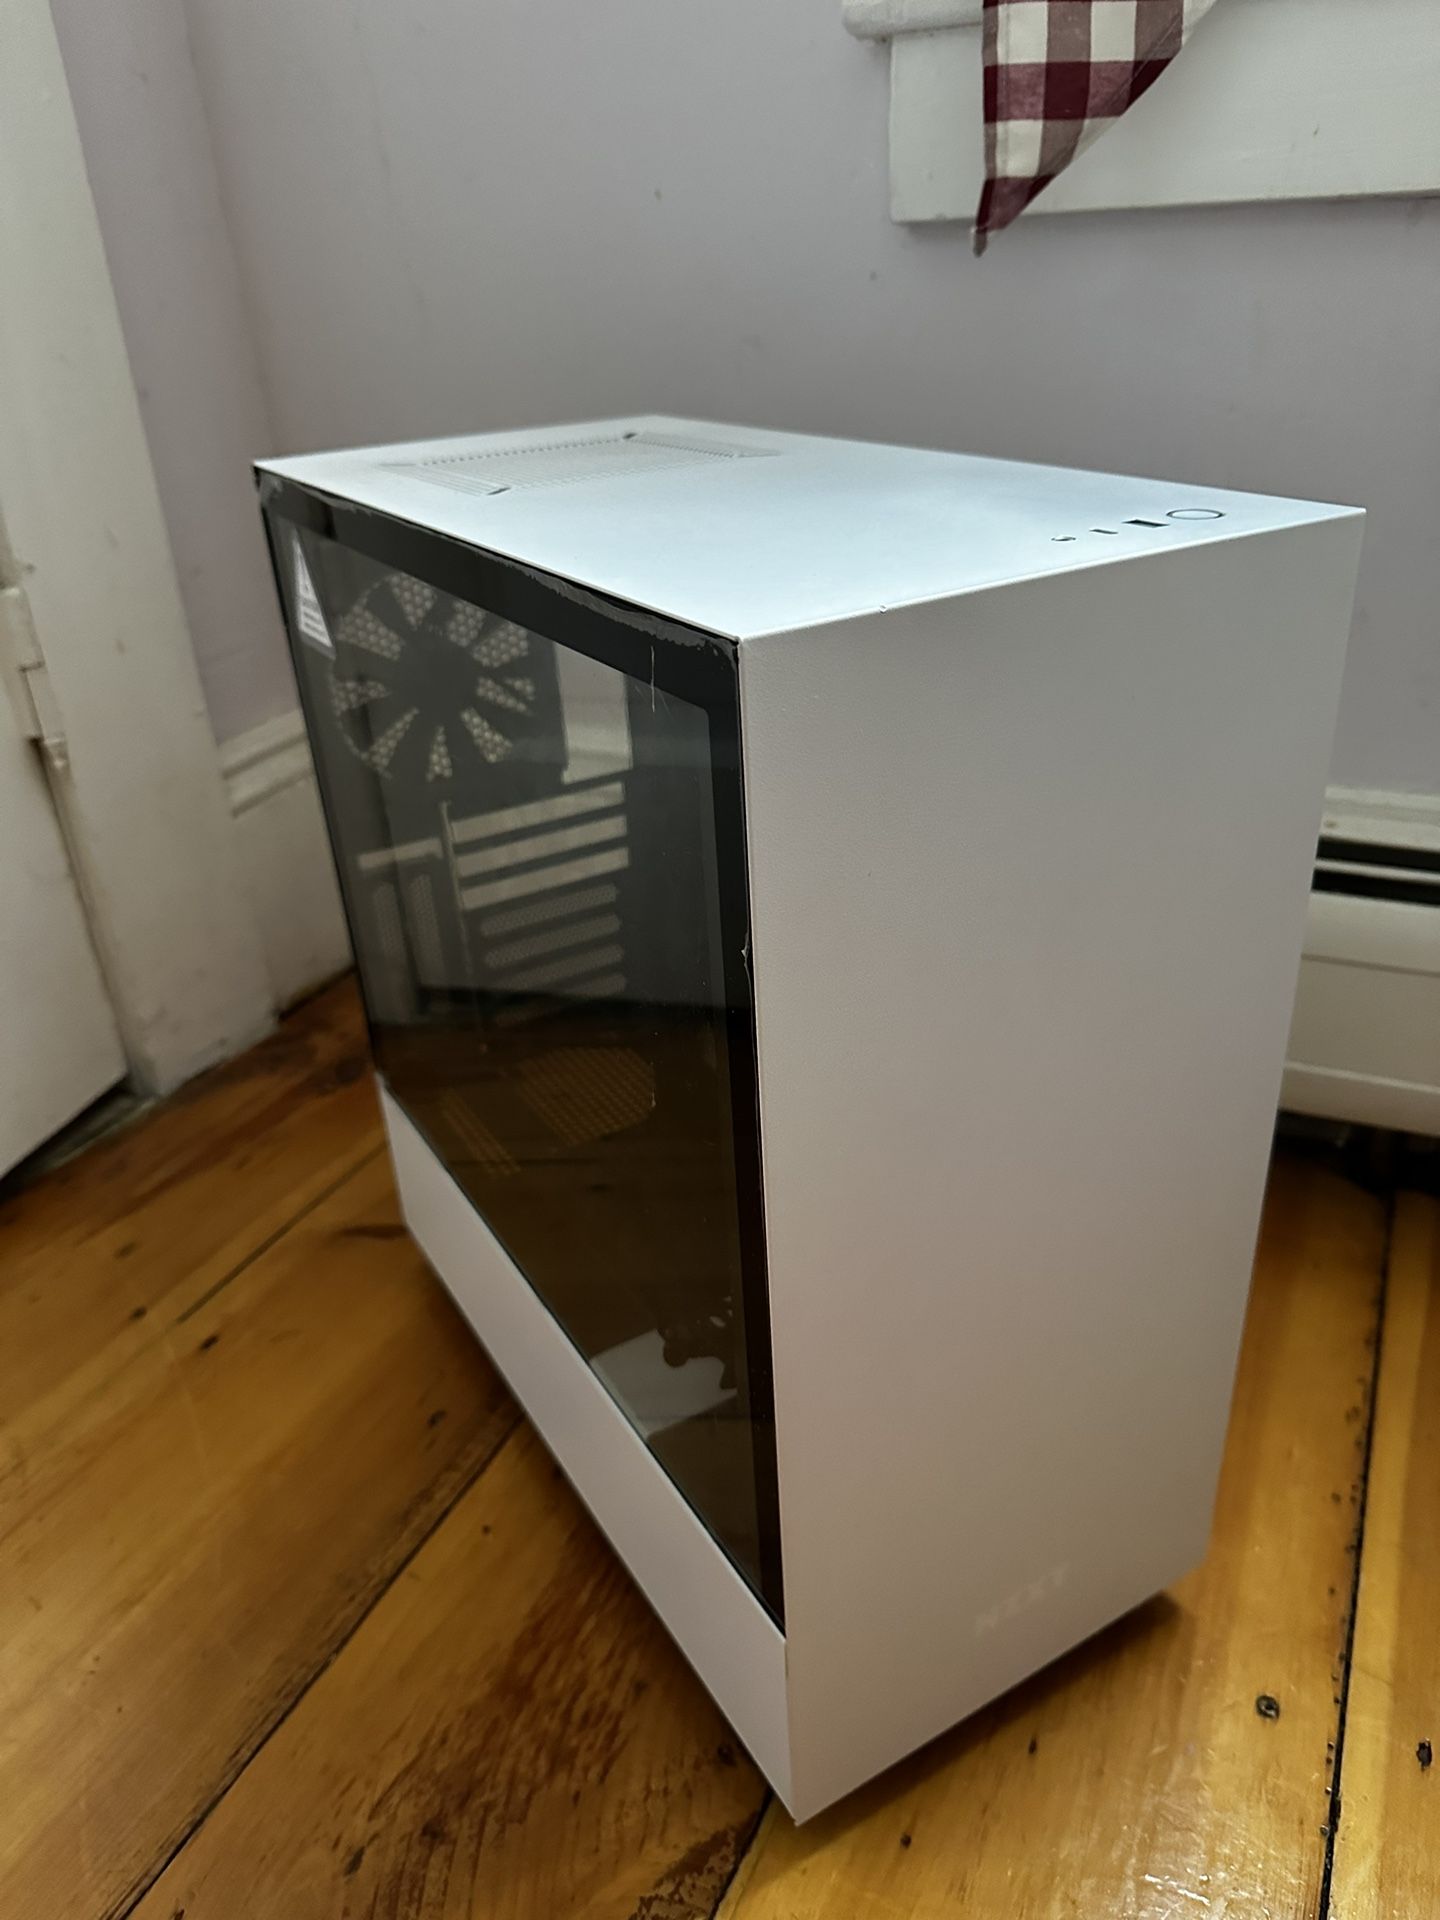 NZXT H510 Mid Tower PC Case